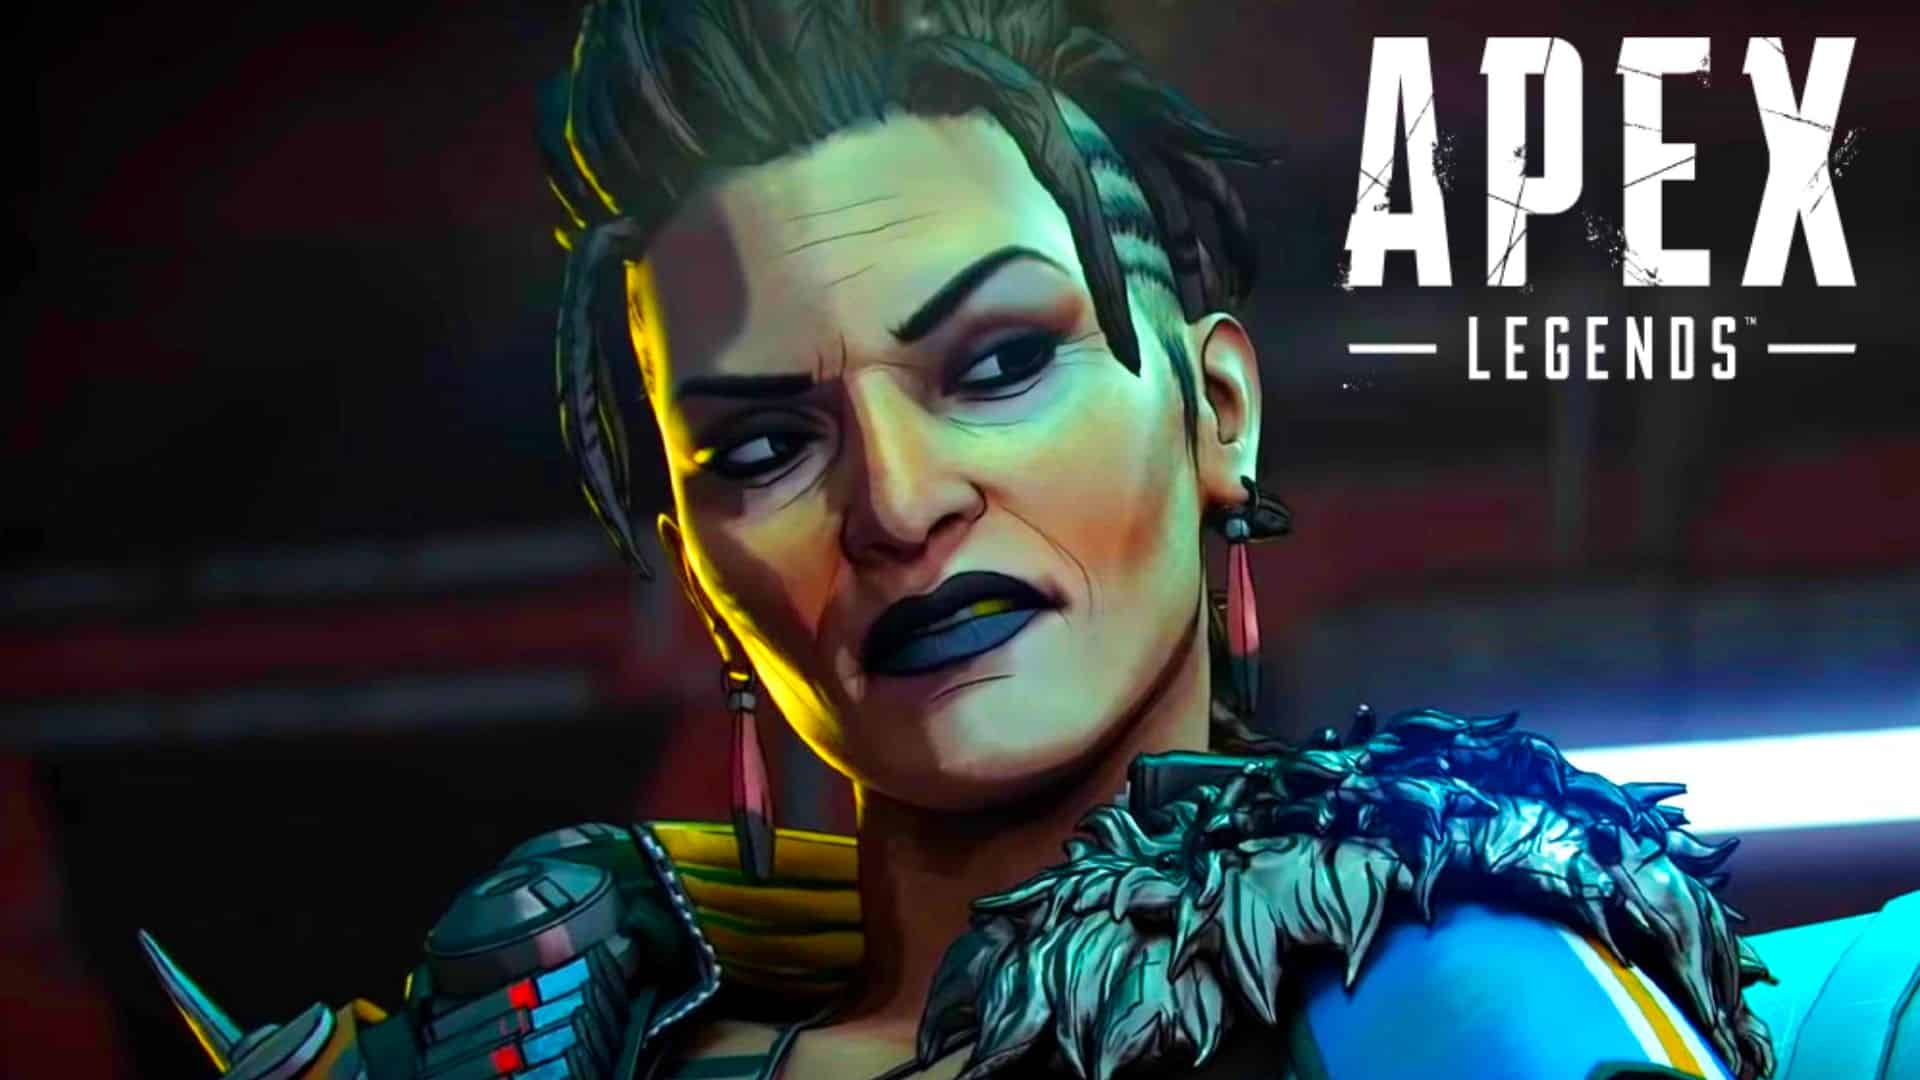 Mad Maggie staring at Apex Legends logo